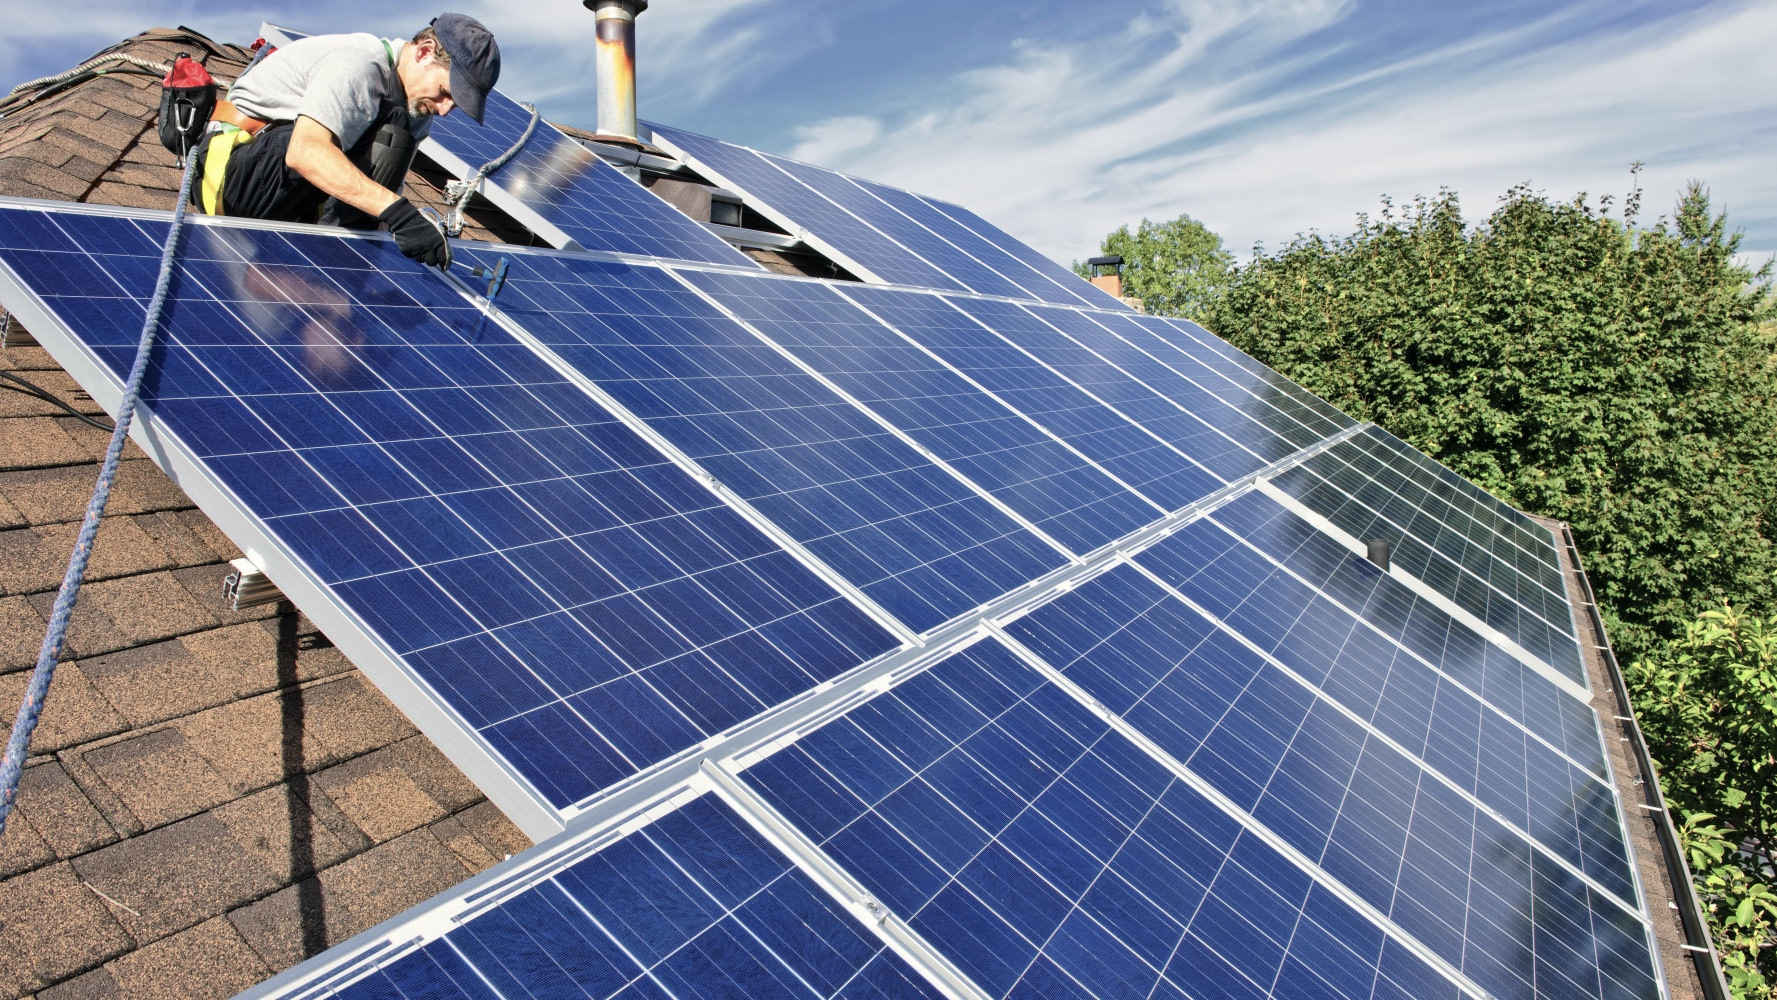 Elite Enterprise Group - Solar. Residential, commercial and agricultural solar systems. Installing solar systems can eliminate your energy bills. Request a free quote now.